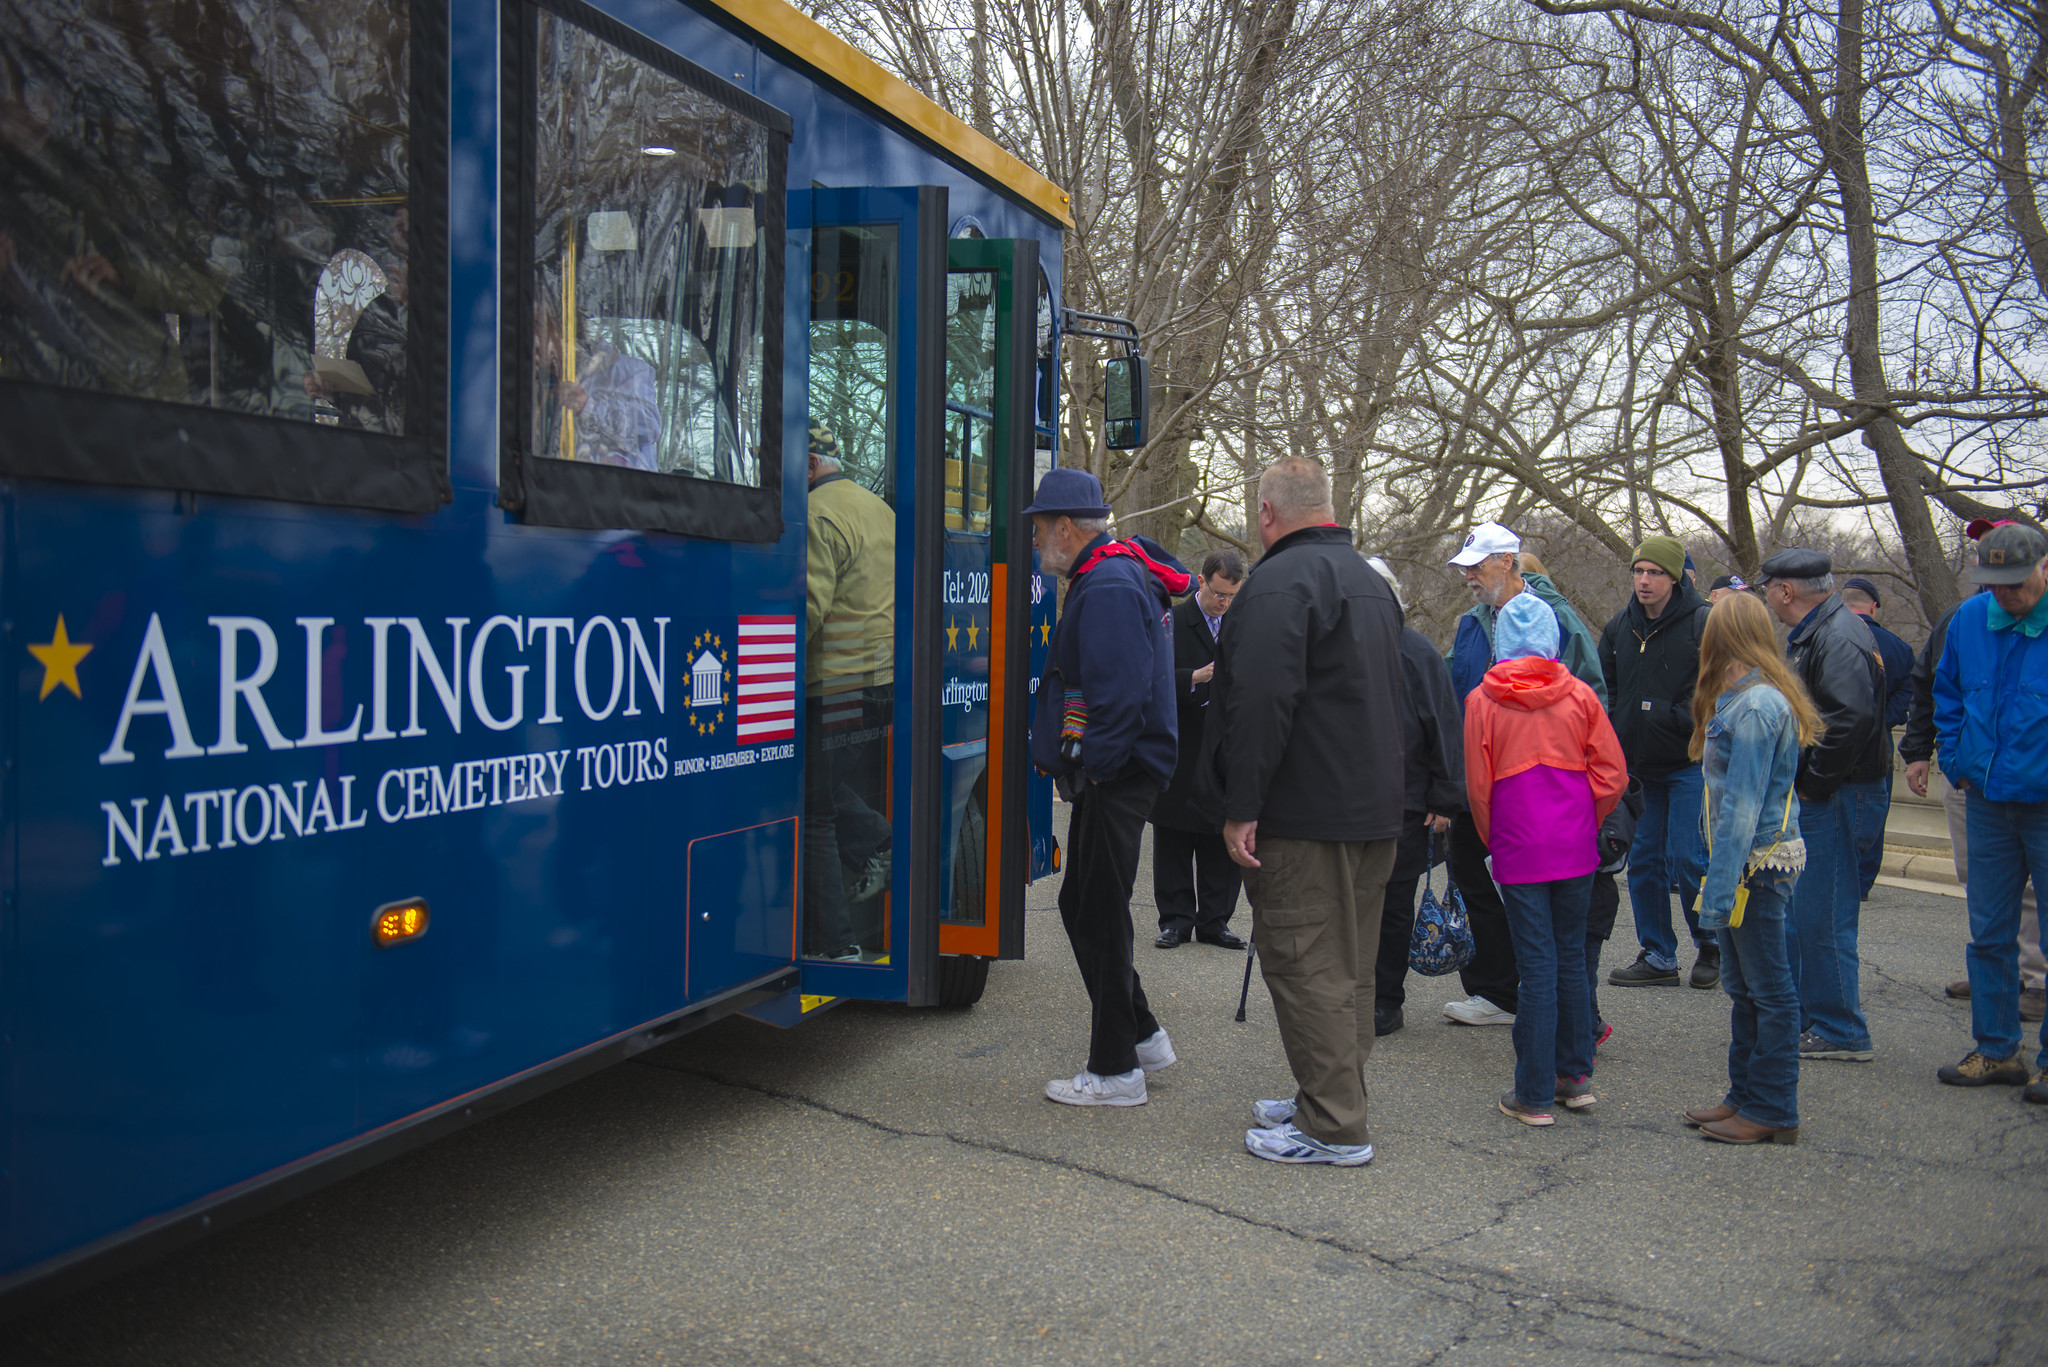 Visitors to Arlington National Cemetery board a tour bus